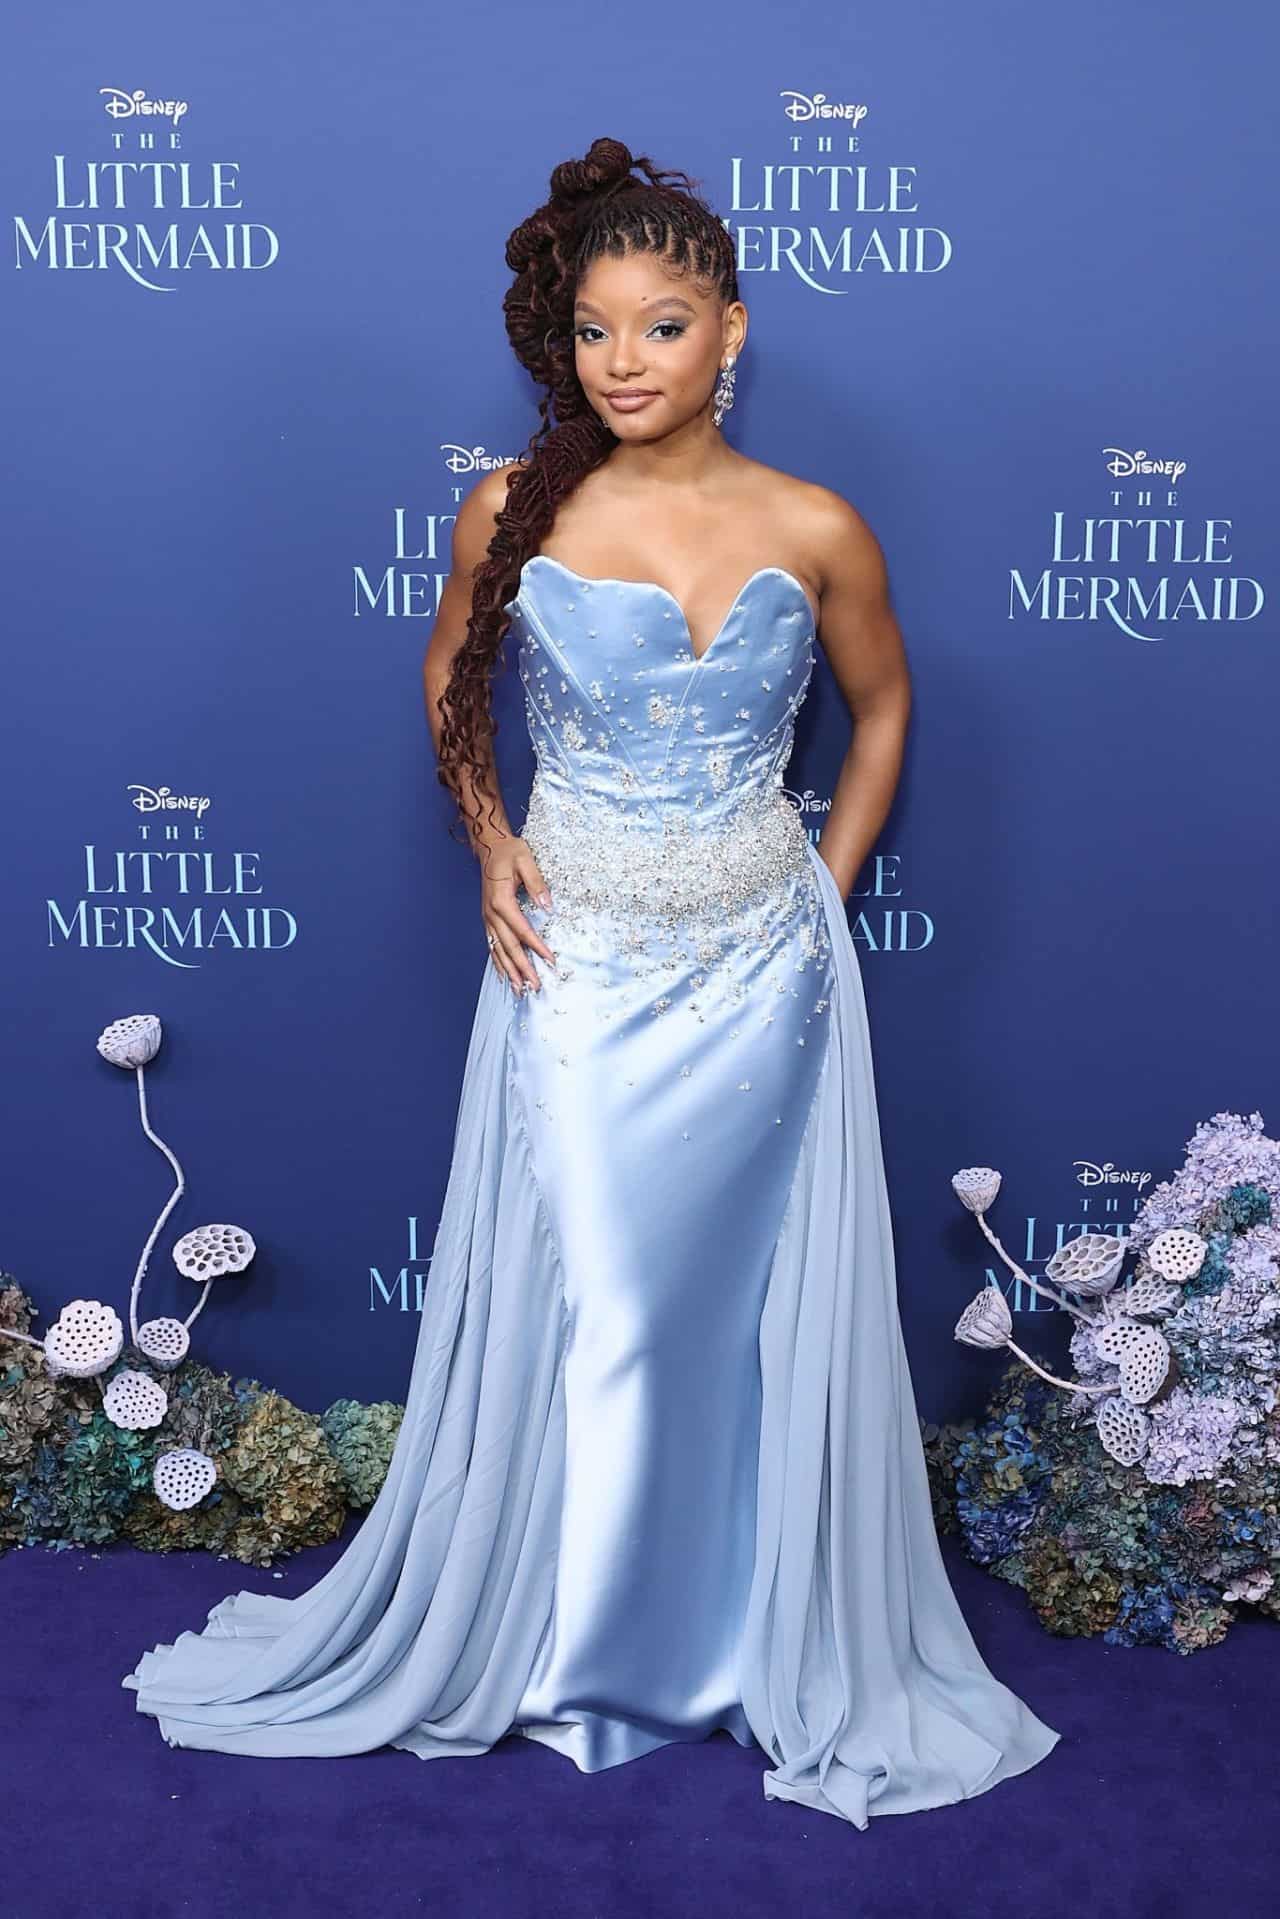 Halle Bailey Makes a Splash at the Australian Premiere of “The Little Mermaid”